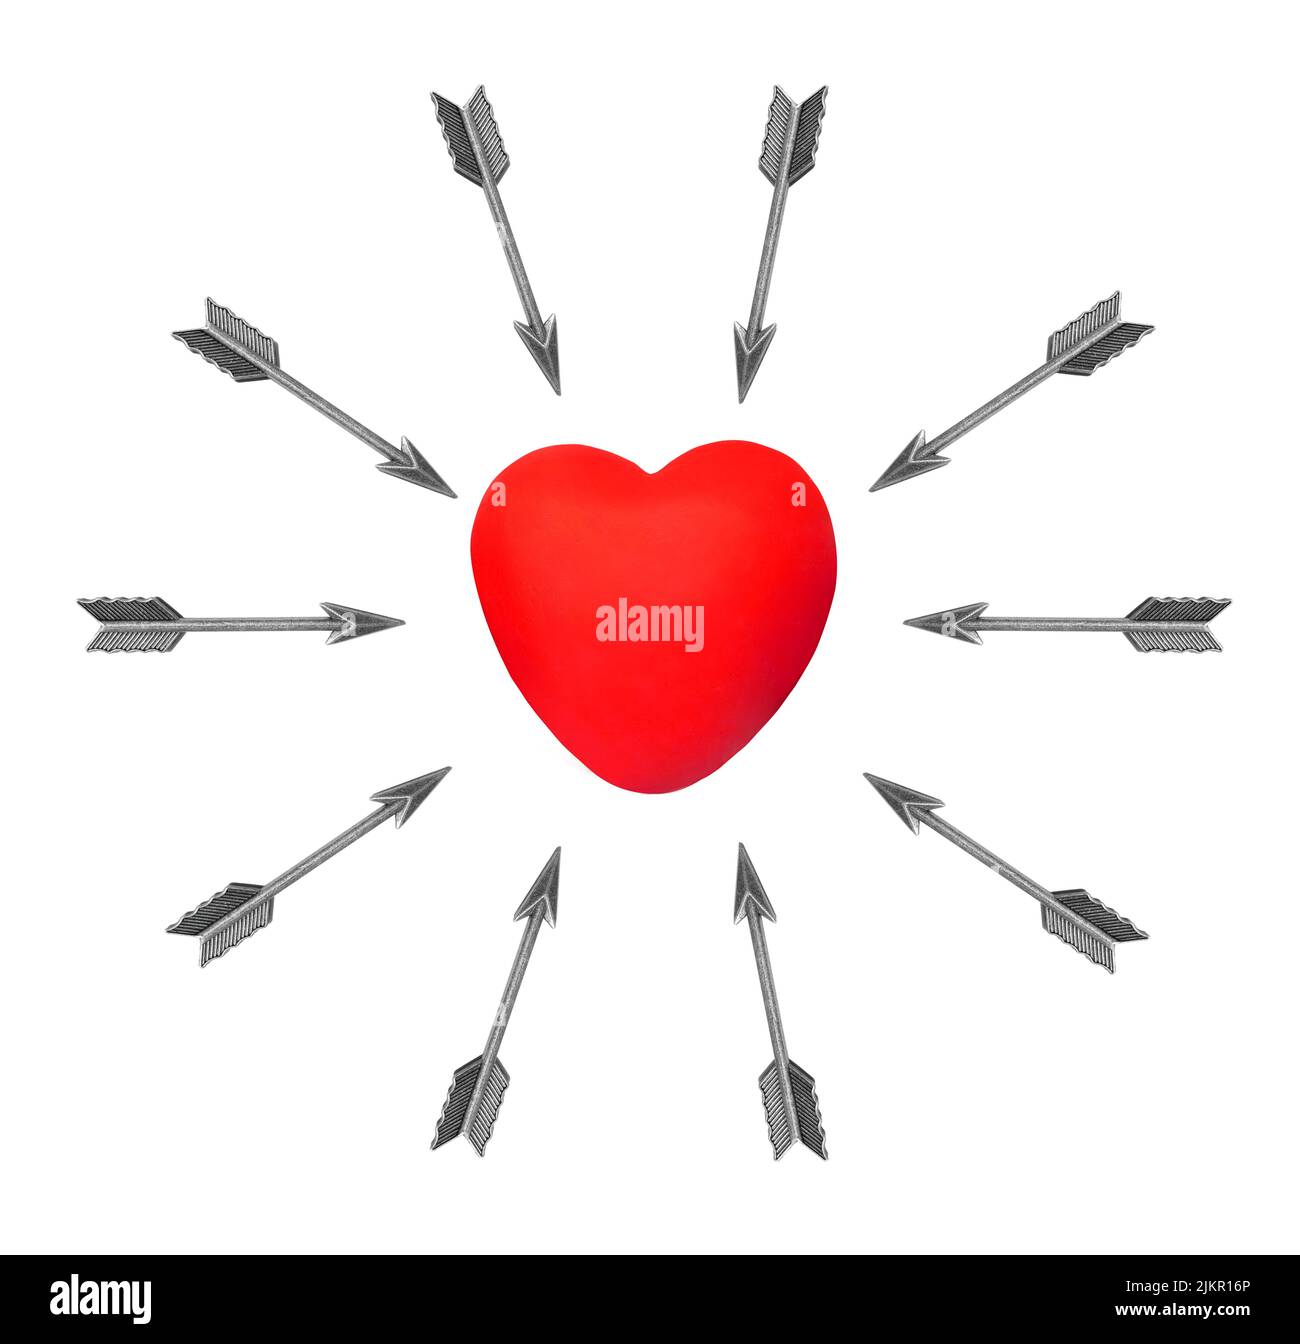 Group of feathered bow arrows aimed at a red heart shape placed in the center on a white background. Heart attack risk factors and symptoms. Stock Photo